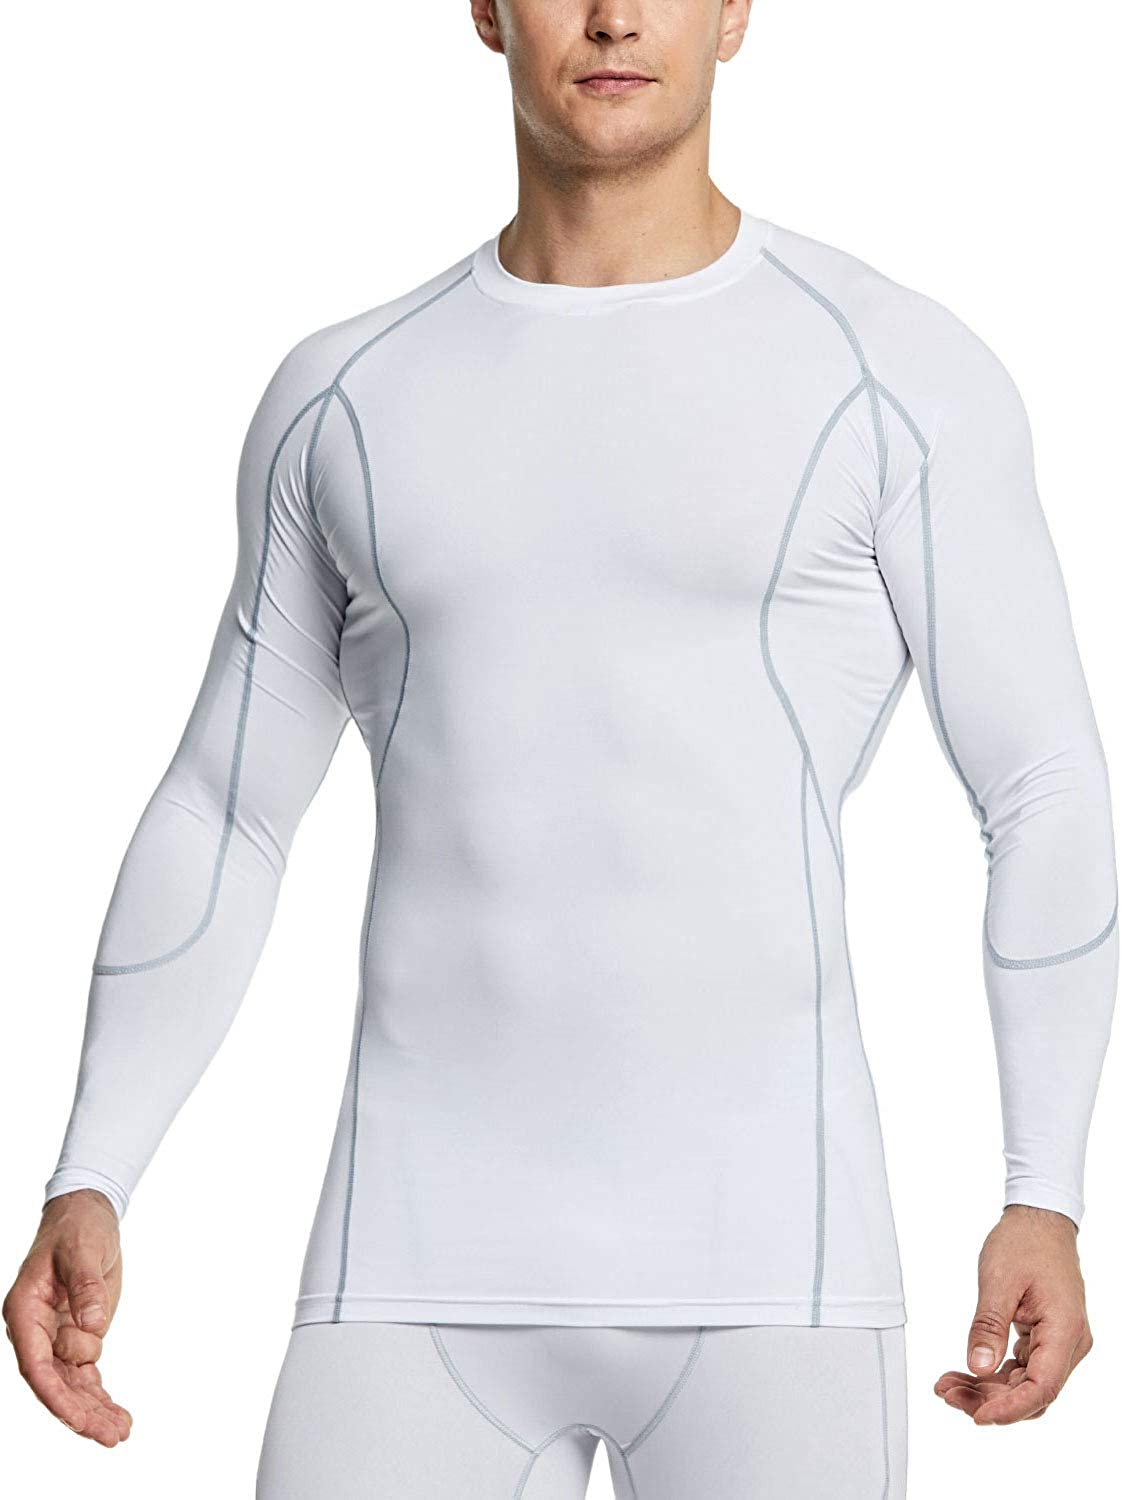 TSLA Mens Cool Dry Fit Long Sleeve Compression Shirts Sports Base Layer T-Shirt Athletic Workout Shirt